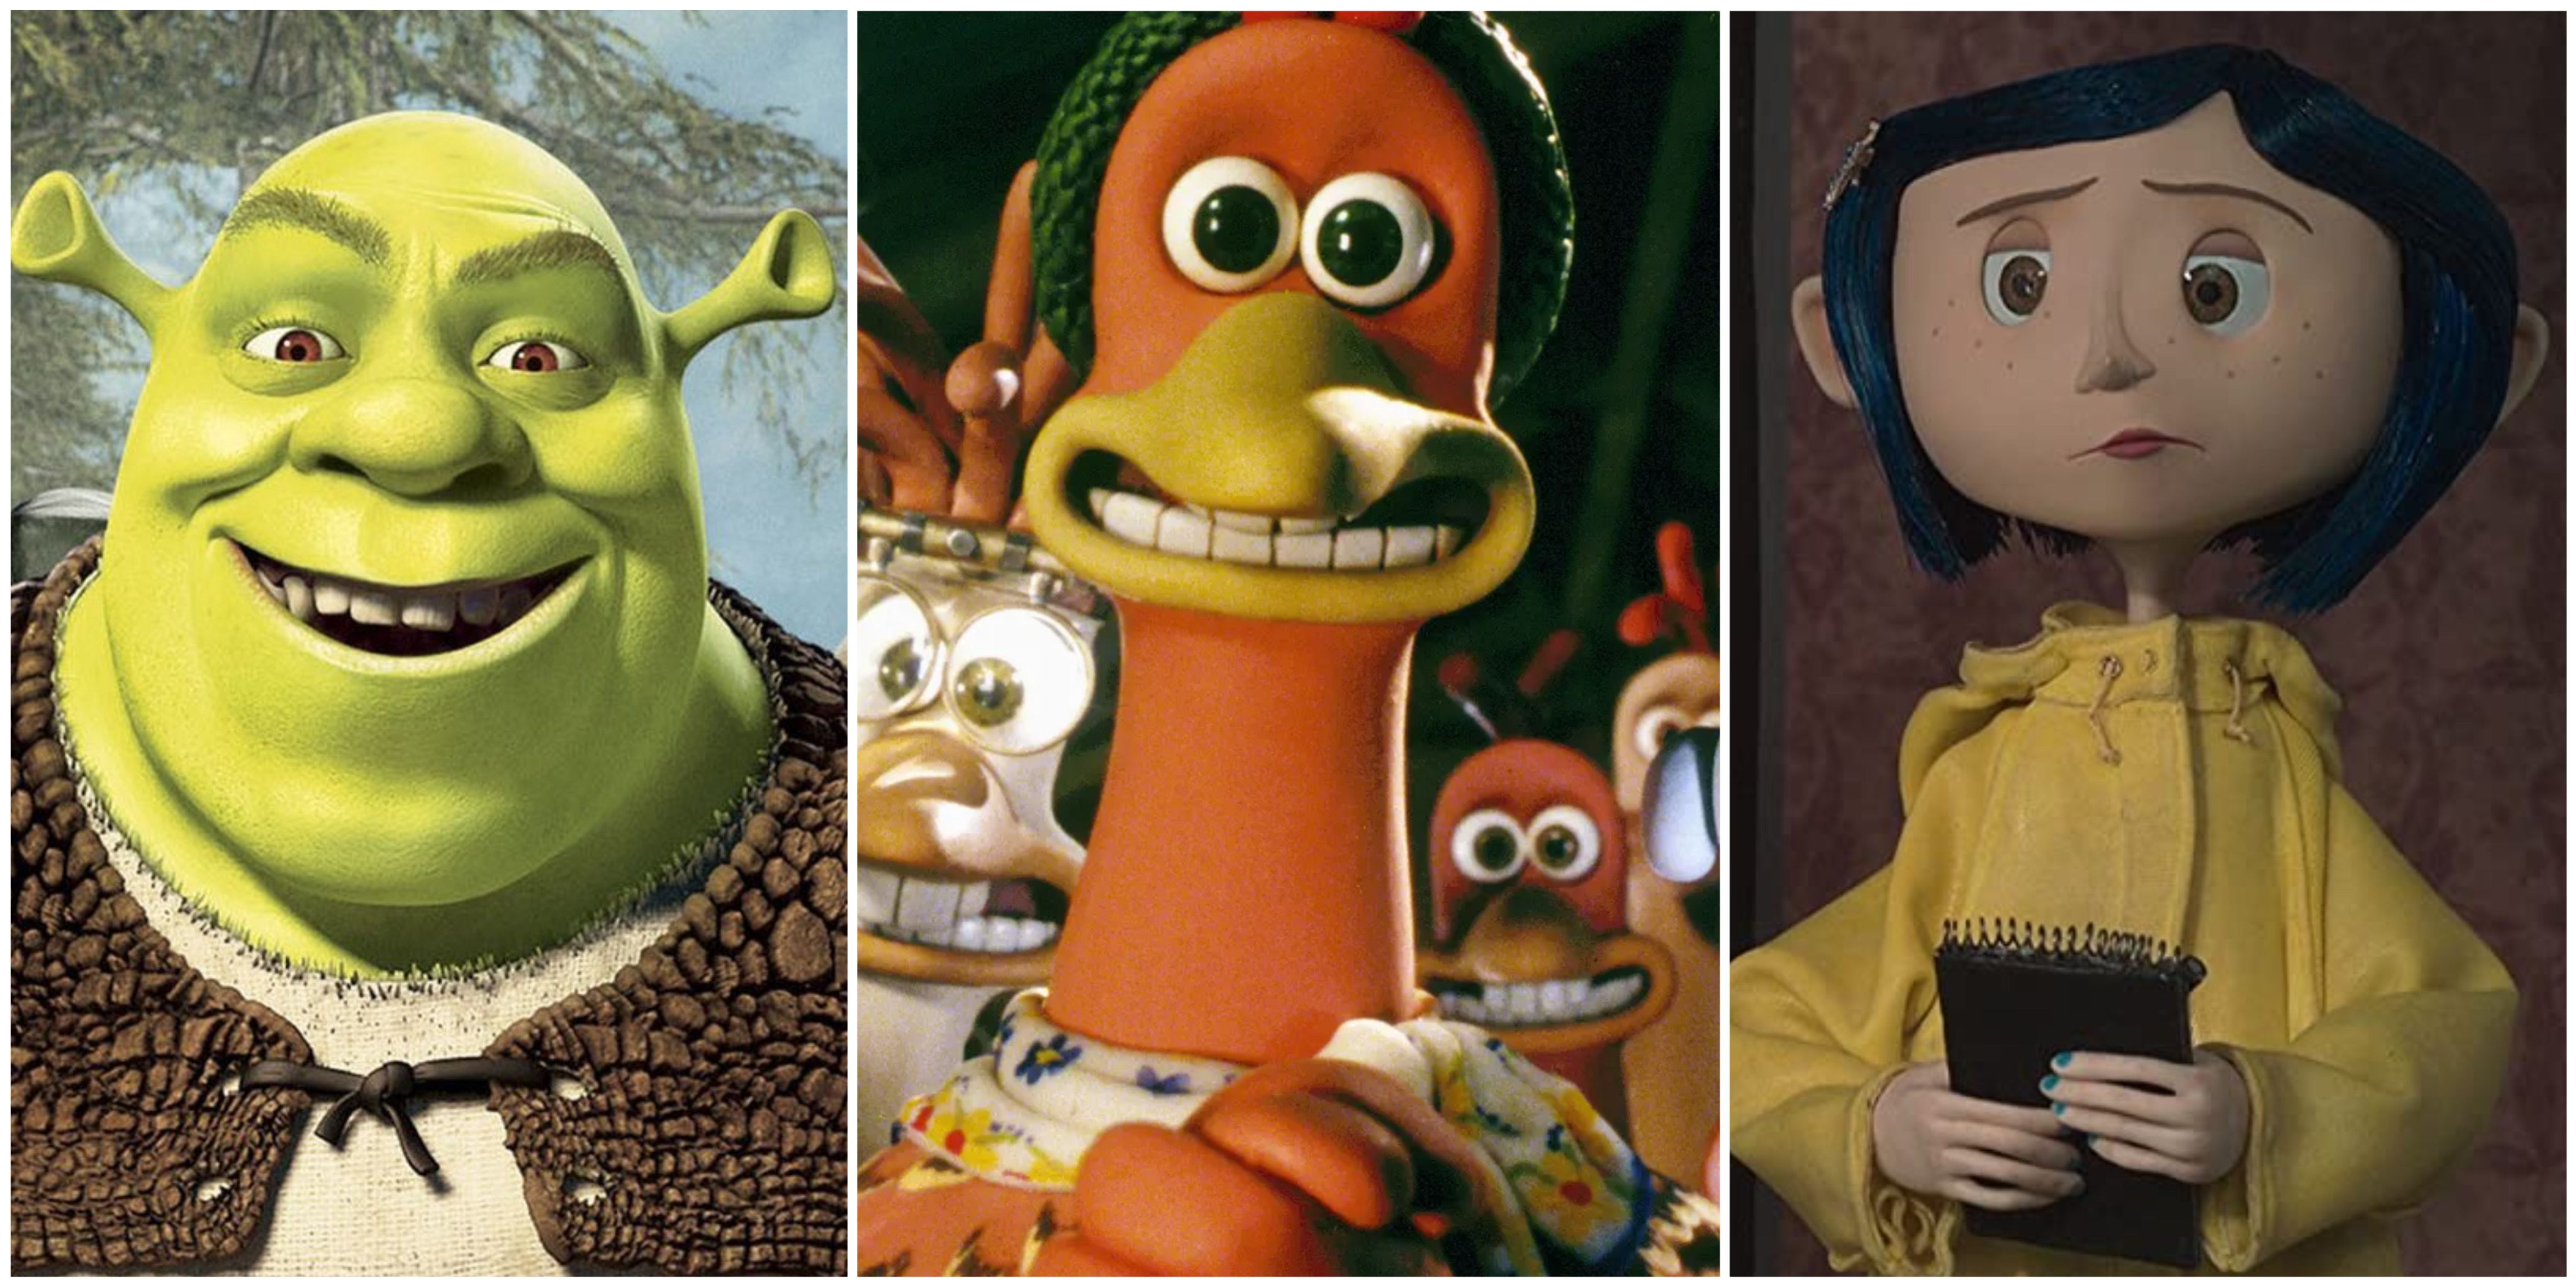 Shrek from Shrek, Ginger from Chicken Run, and Coraline from Coraline